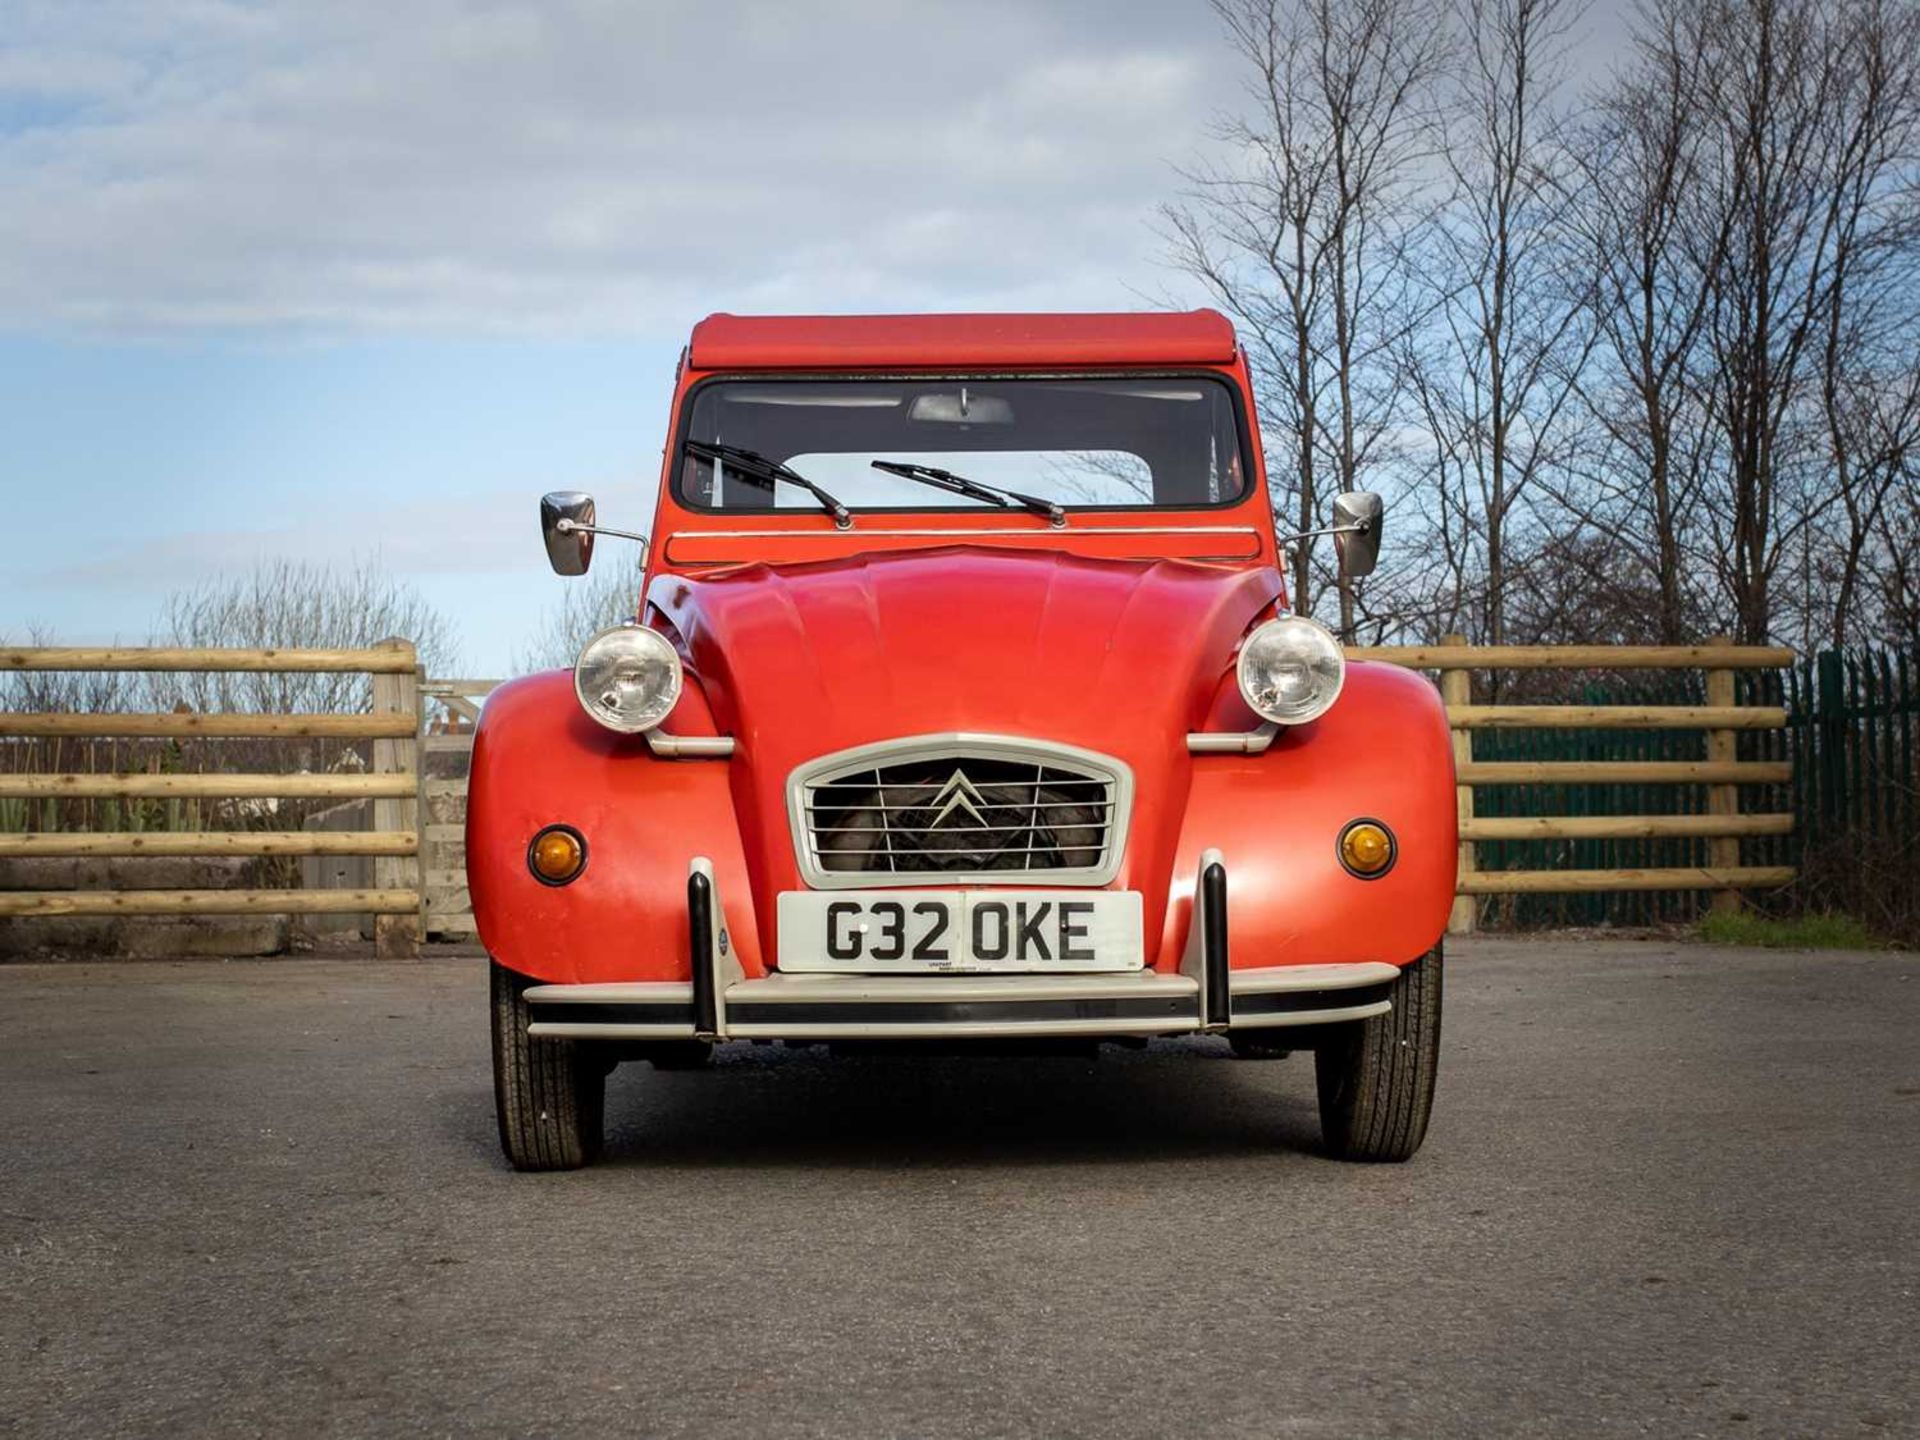 1989 Citroën 2CV6 Spécial Believed to have covered a credible 15,000 miles - Image 3 of 113